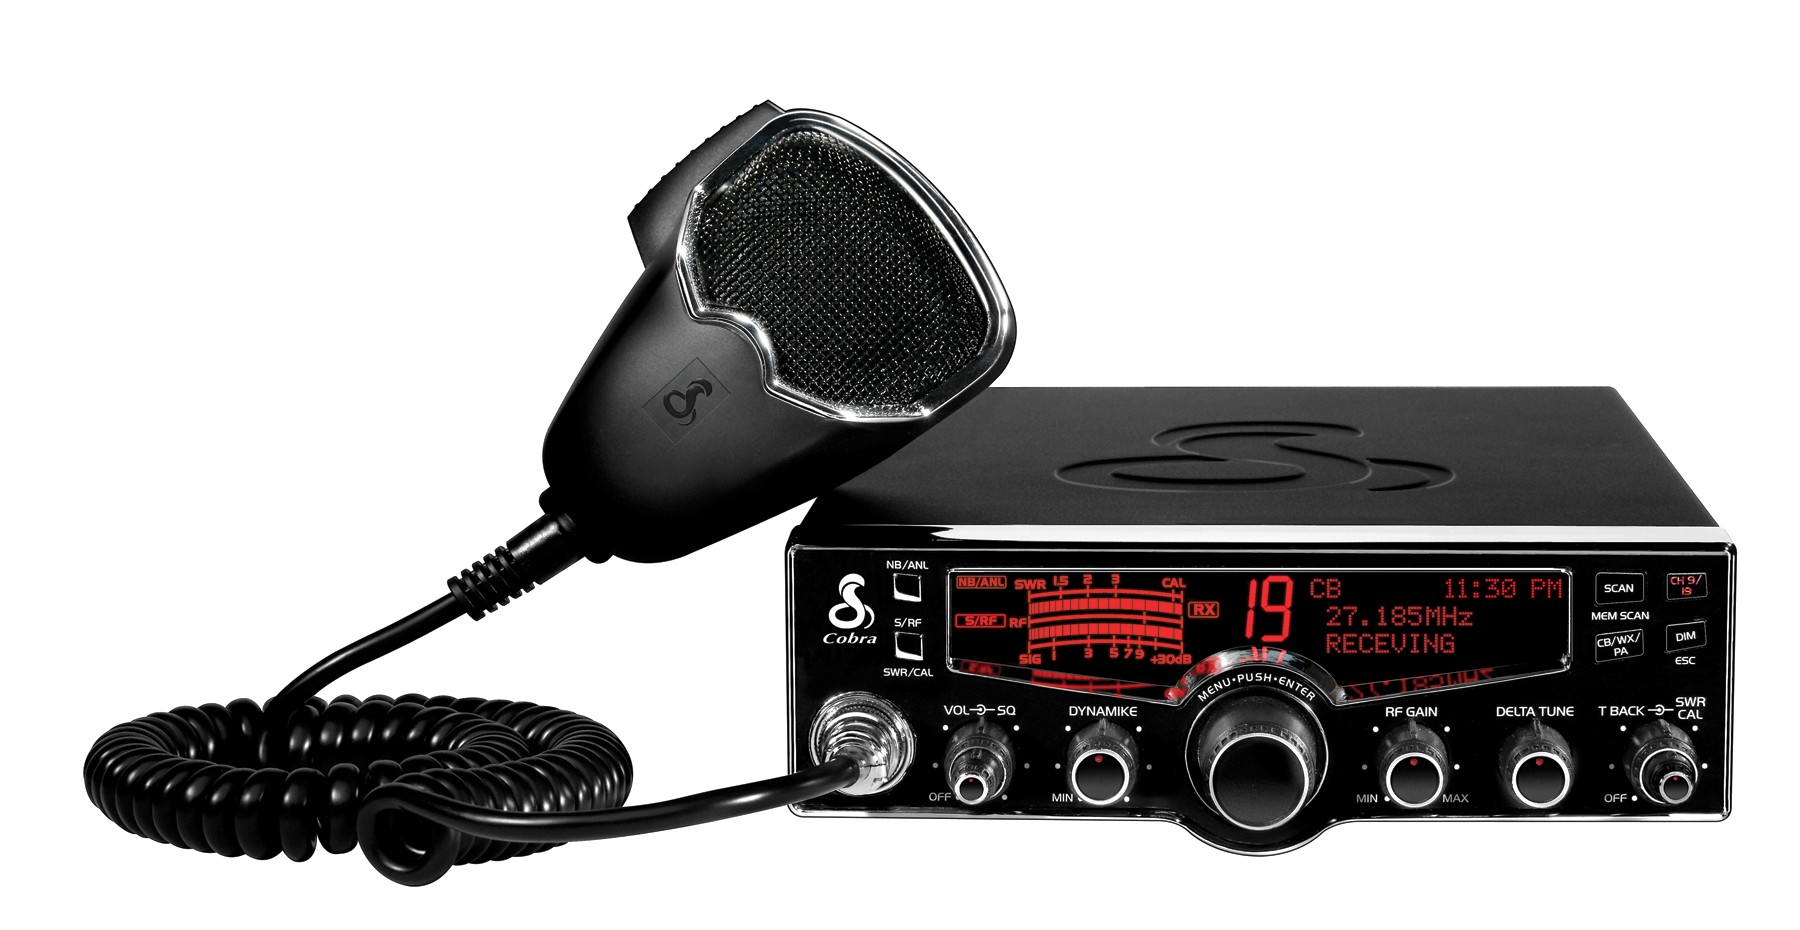 What is the way to increase the power output on a Cobra CB radio?